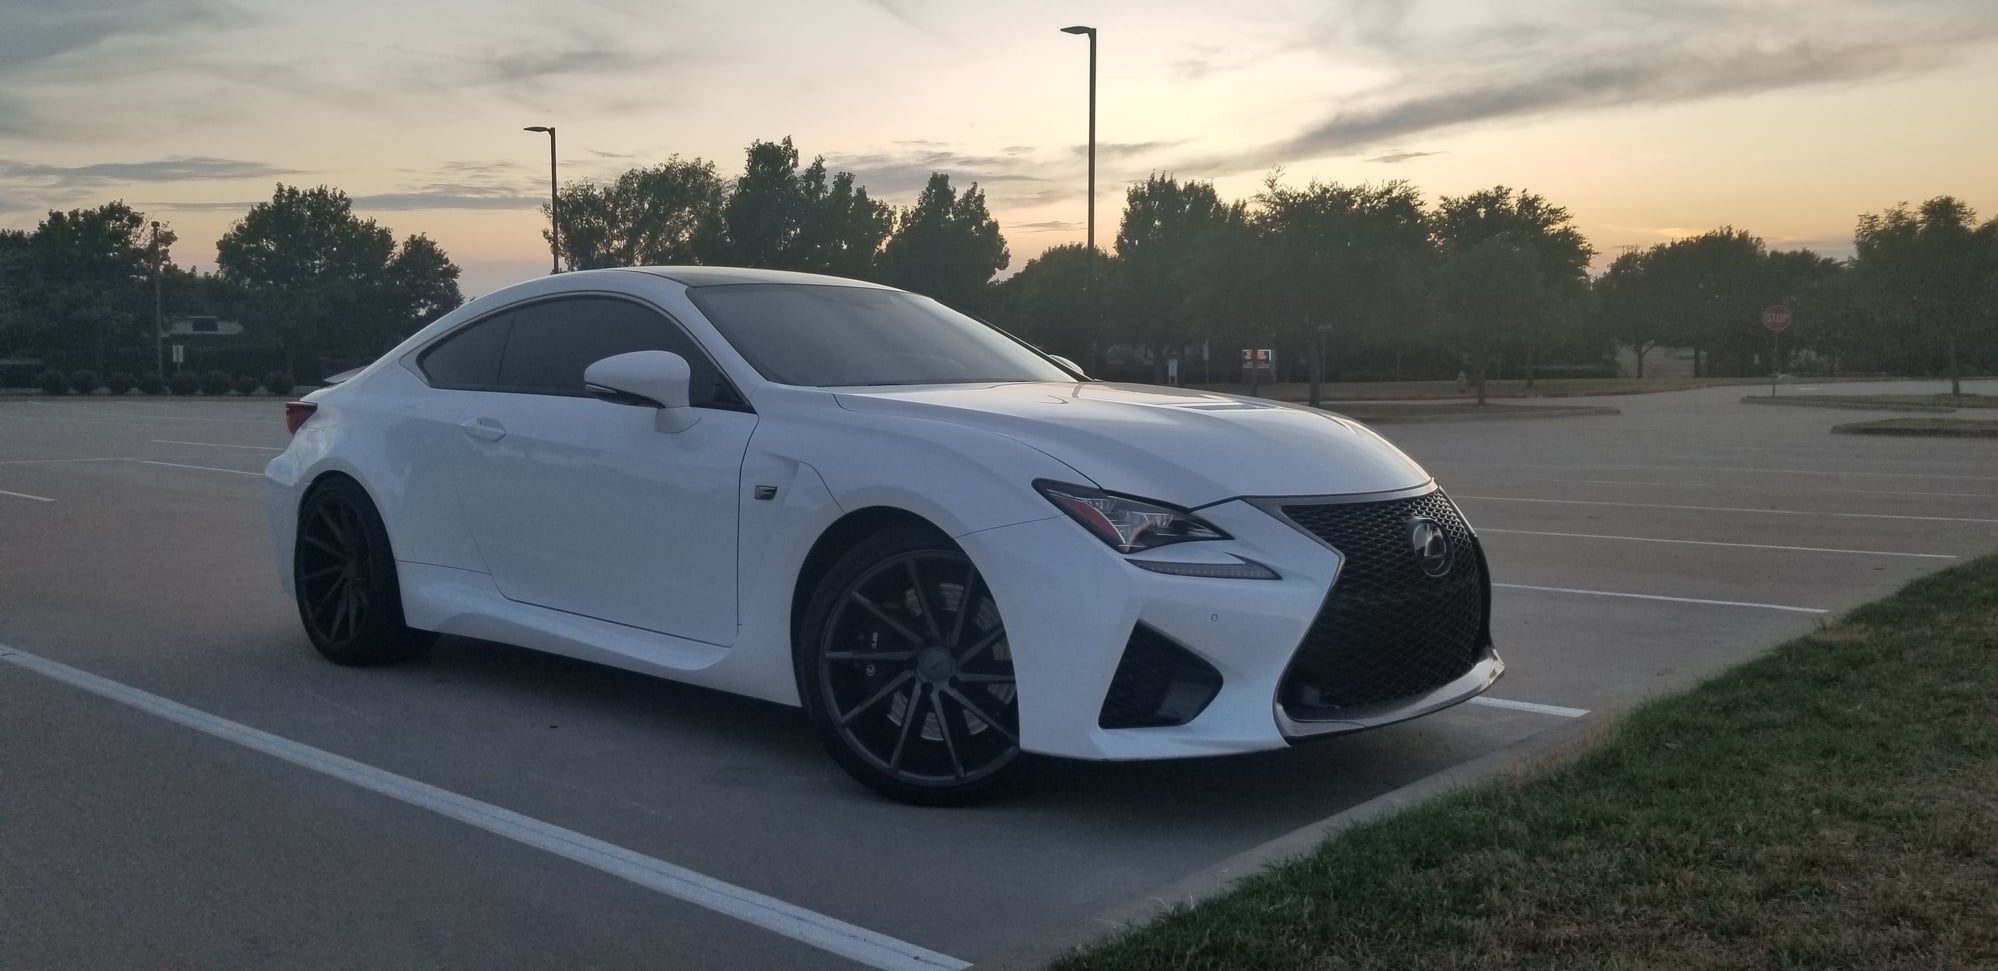 2015 Lexus RC F - 2015 Lexus RCF, Ultra white w/white leather, TVD & Carbon Package, 20" Vossen wheels - Used - VIN JTHHP5BC3F5003004 - 36,000 Miles - 8 cyl - 2WD - Automatic - Coupe - White - Dallas, TX 75070, United States